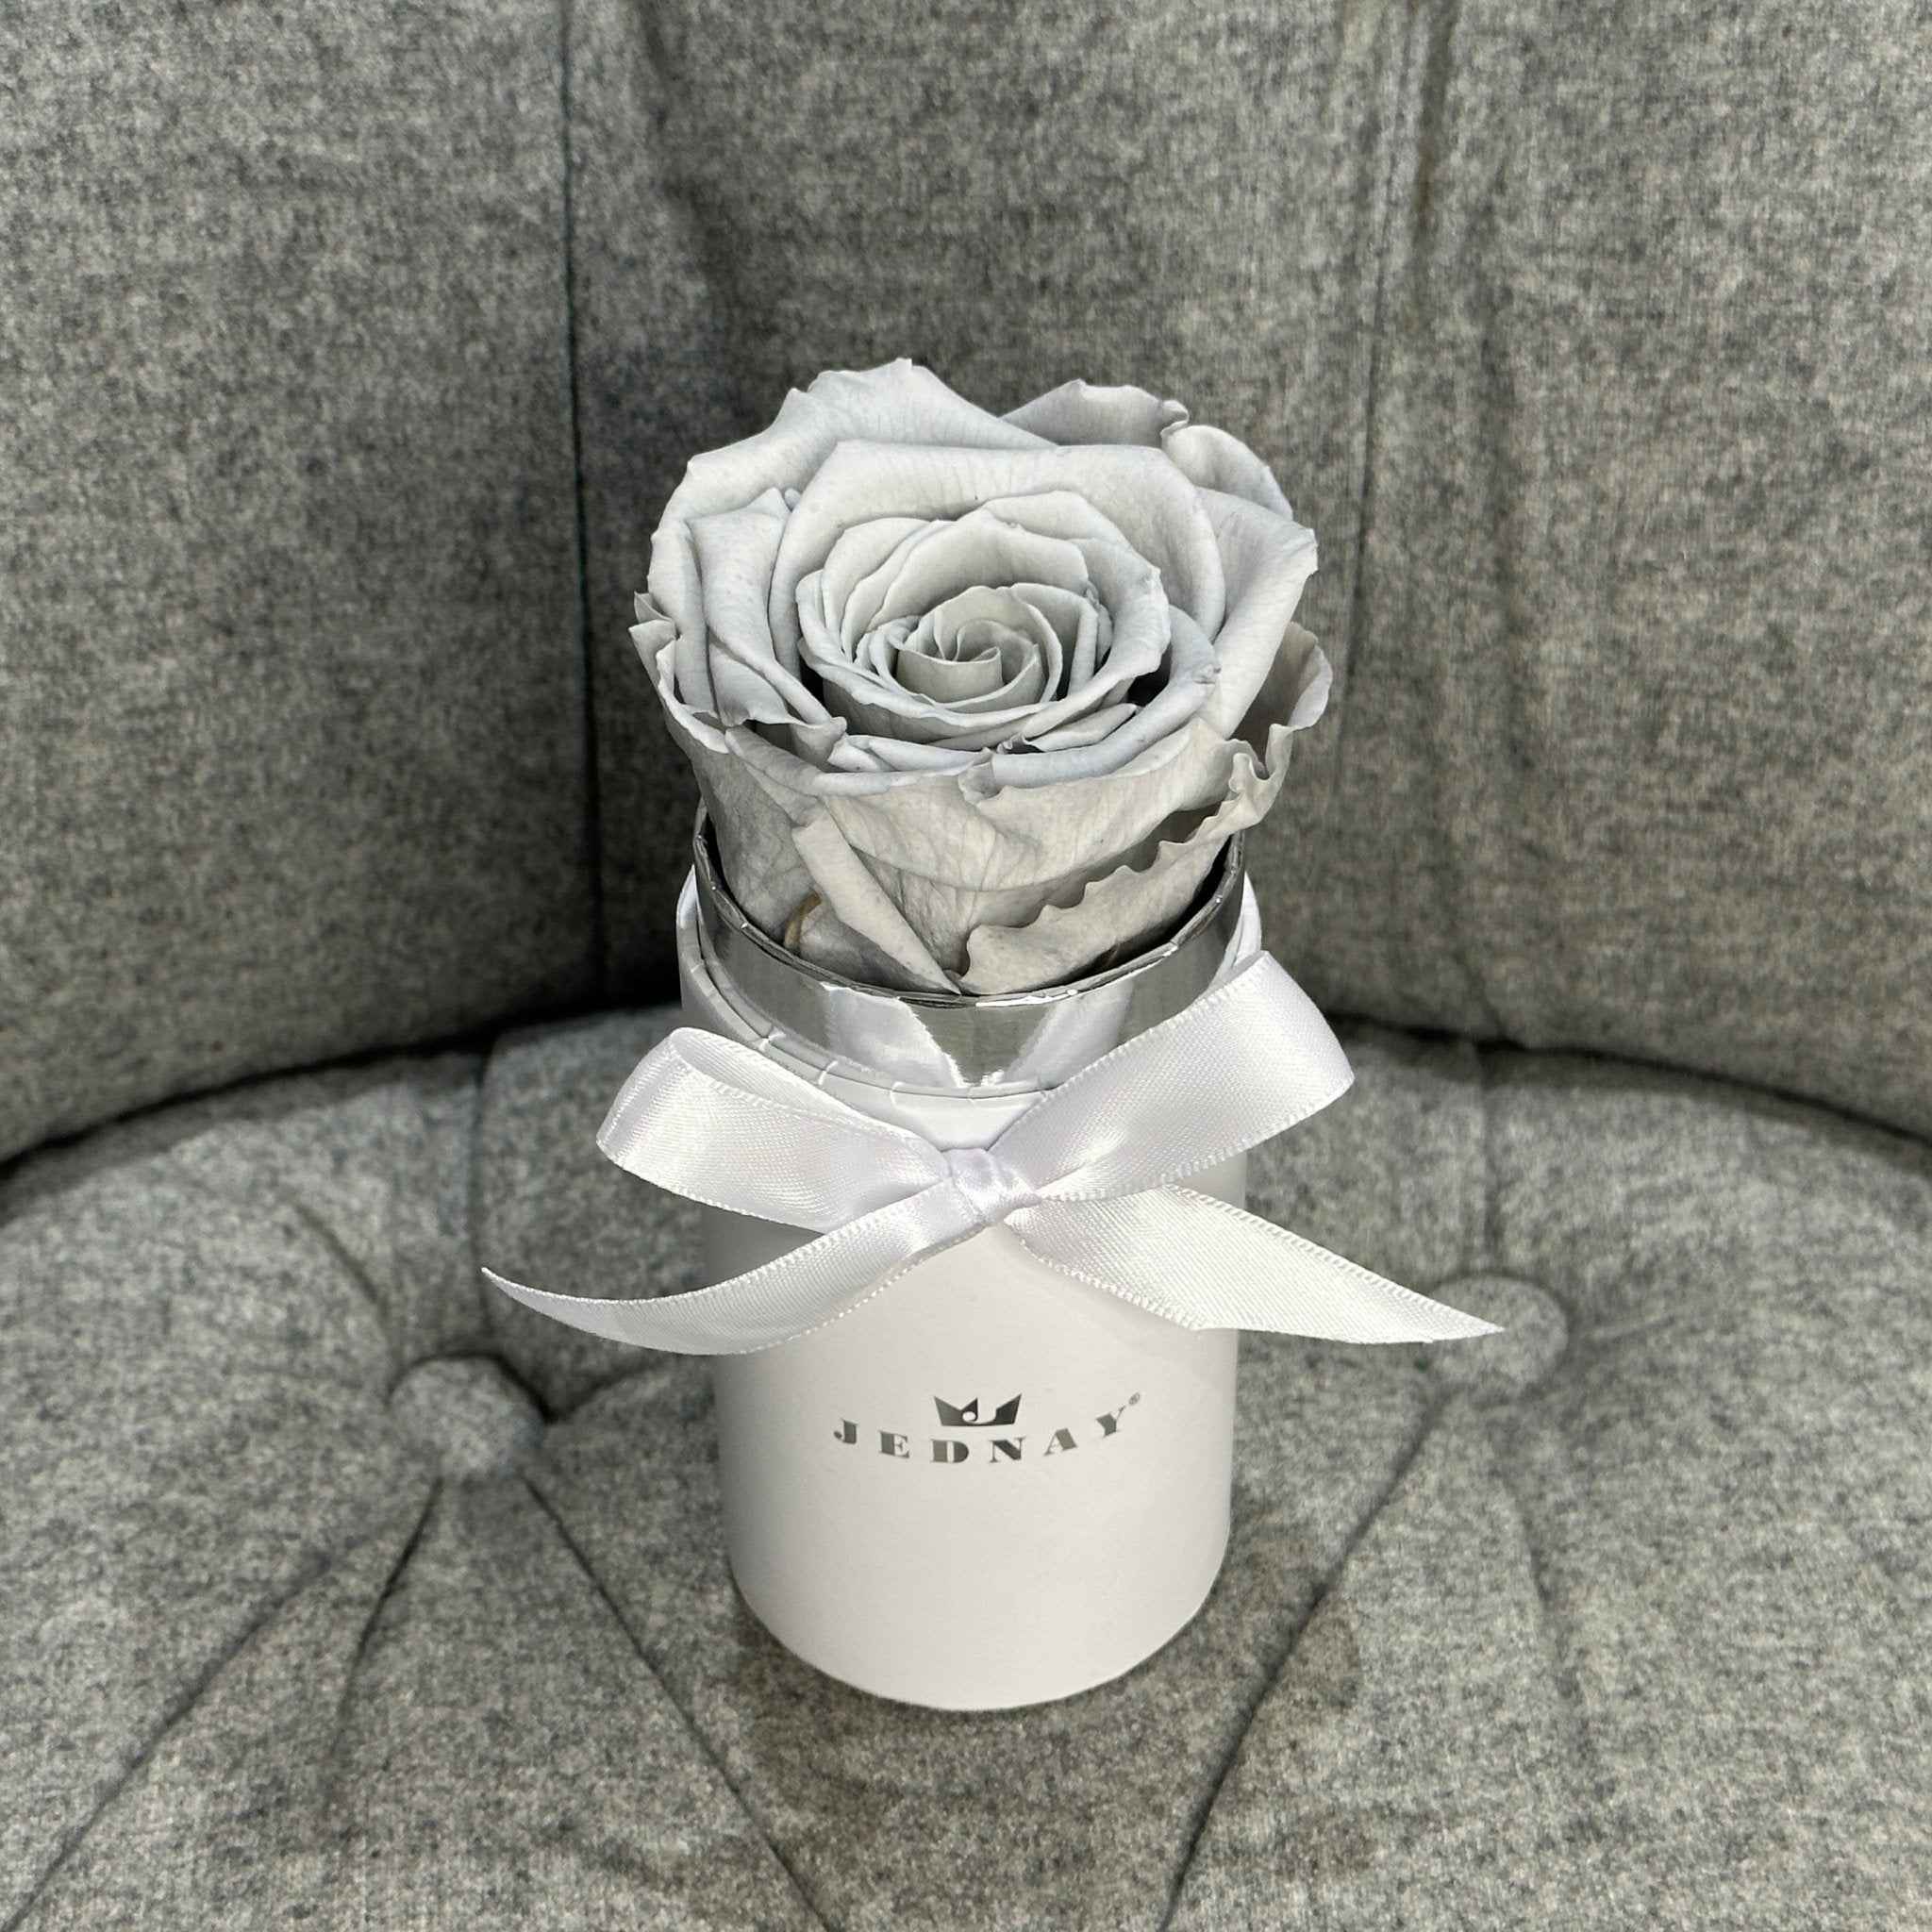 The Uno - Graceful Grey Eternal Rose - Classic White Box - Jednay Roses